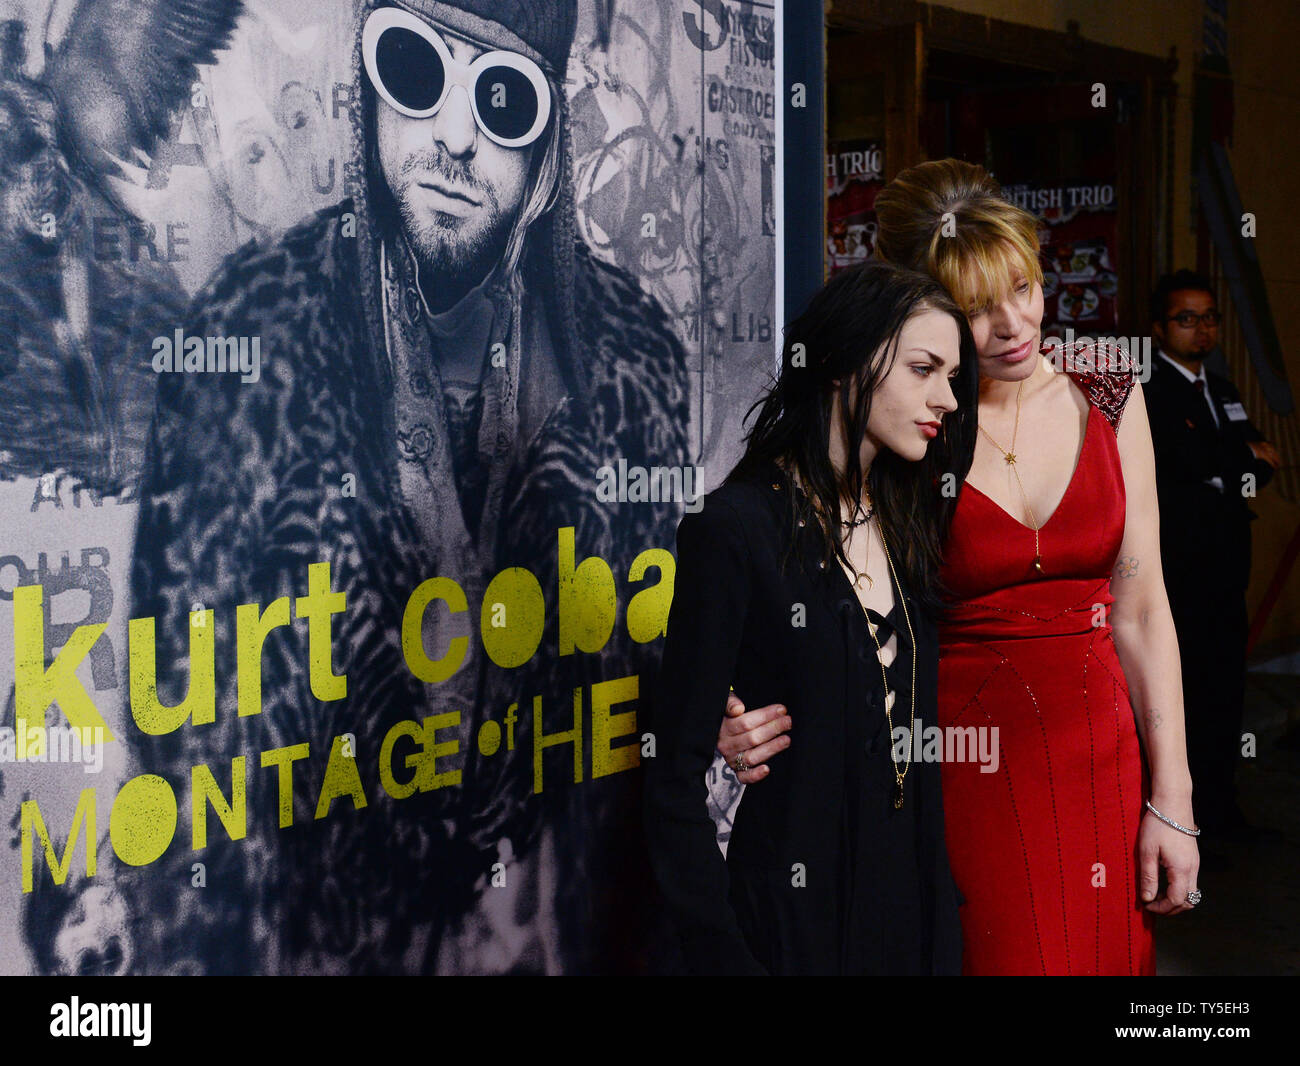 Alternative rock singer and songwriter Courtney Love (R) and her daughter Frances Bean Cobain attend the premiere of the authorized documentary 'Kurt Cobain: Montage of Heck' at the Egyptian Theatre in the Hollywood section of Los Angeles on April 21, 2015. Love reportedly  teared up while discussing her late husband's documentary at the Tribeca Film Festival last Sunday. Storyline: An authorized documentary on the late musician Kurt Cobain, from his early days in Aberdeen, Washington to his success and downfall with the grunge band Nirvana.  Photo by Jim Ruymen/UPI Stock Photo